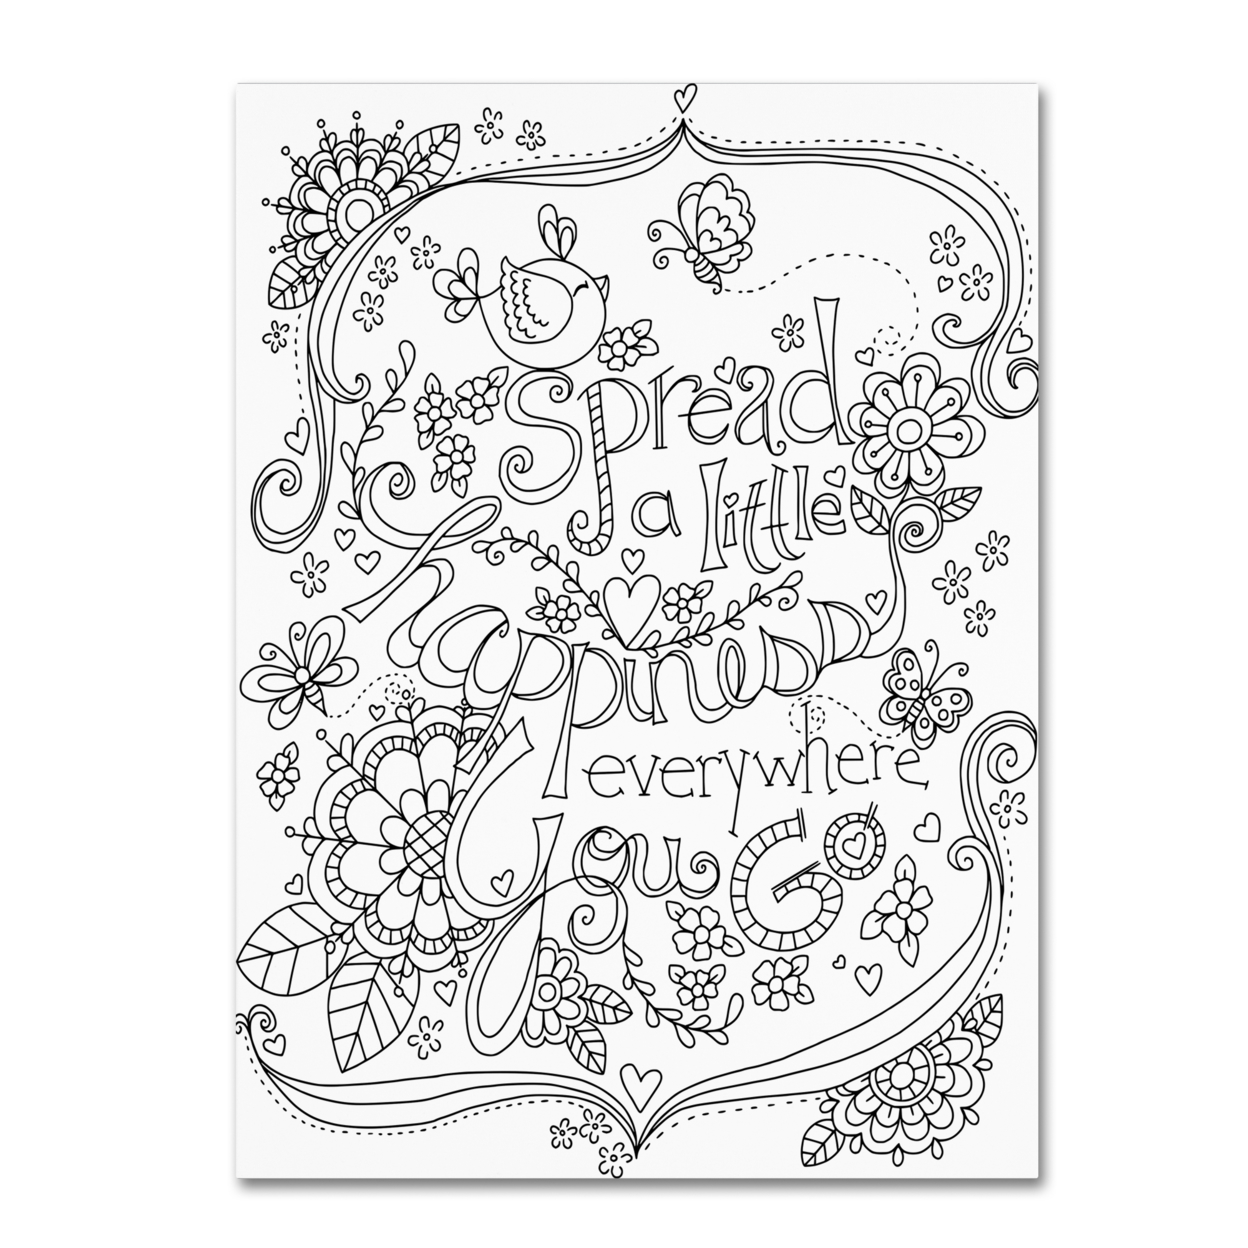 Jennifer Nilsson 'Spread Happiness Coloring Page' Canvas Wall Art 35 X 47 Inches